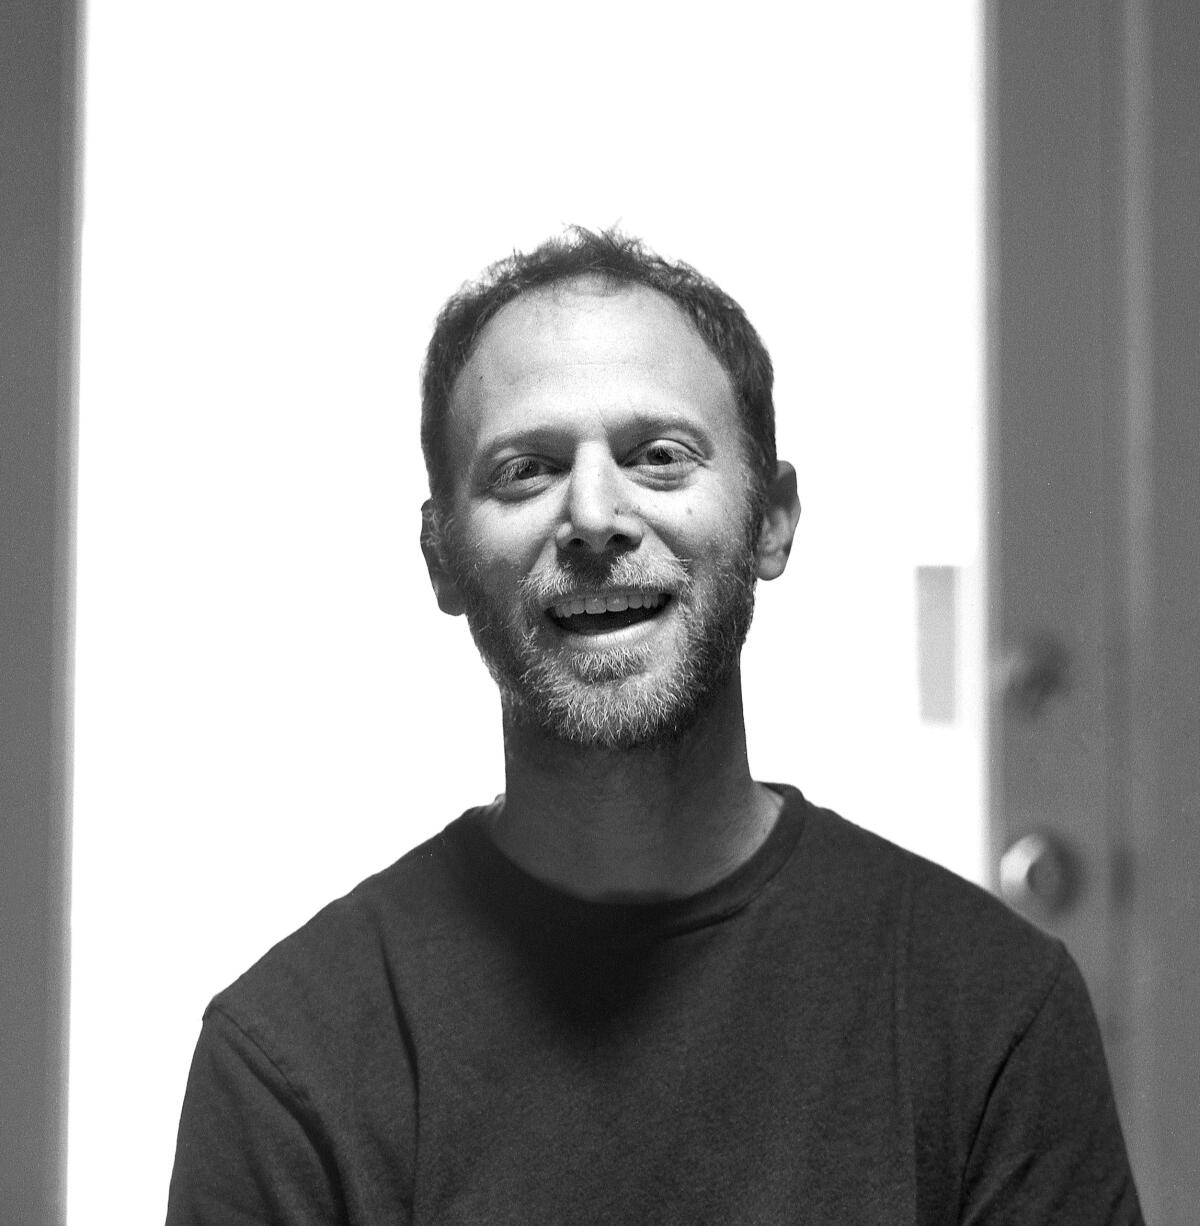 A black and white photo shows a smiling Steve Roden wearing a dark sweatshirt.